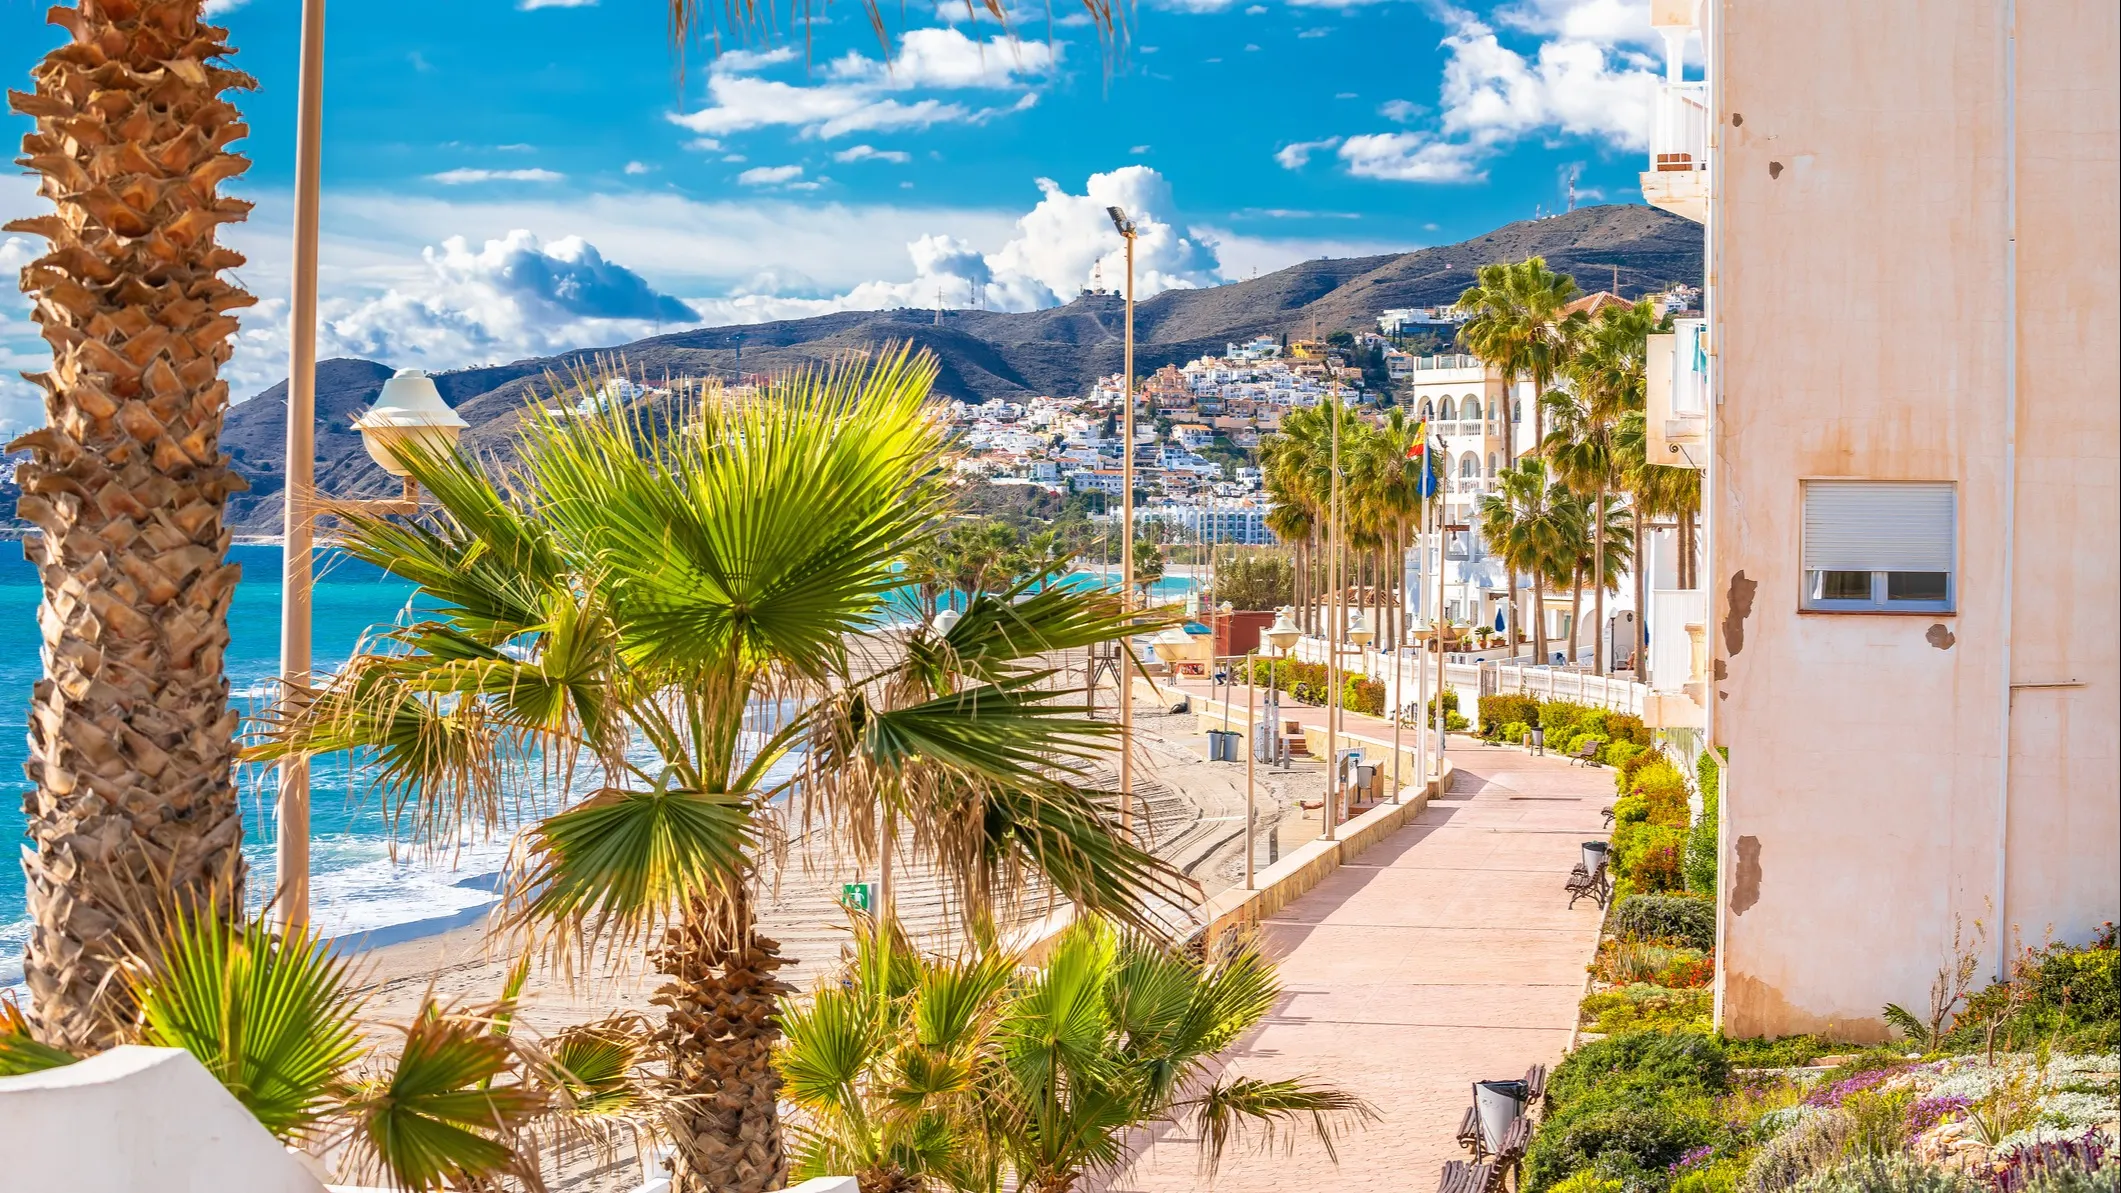 Dramatic views and pleasant weather are just two reasons why expats love the Costa del Sol